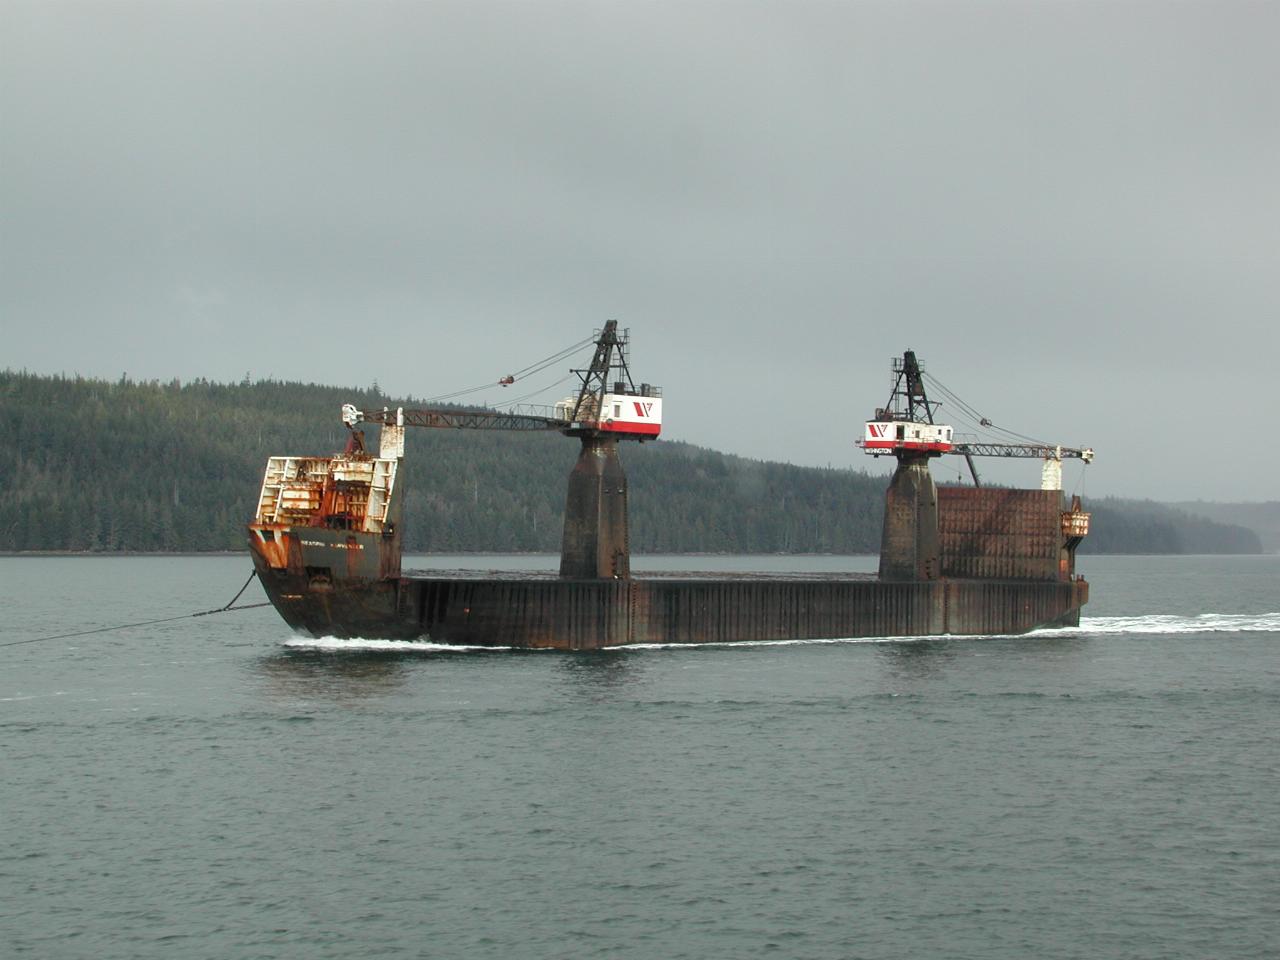 The vessel being passed - probably a timber carrier